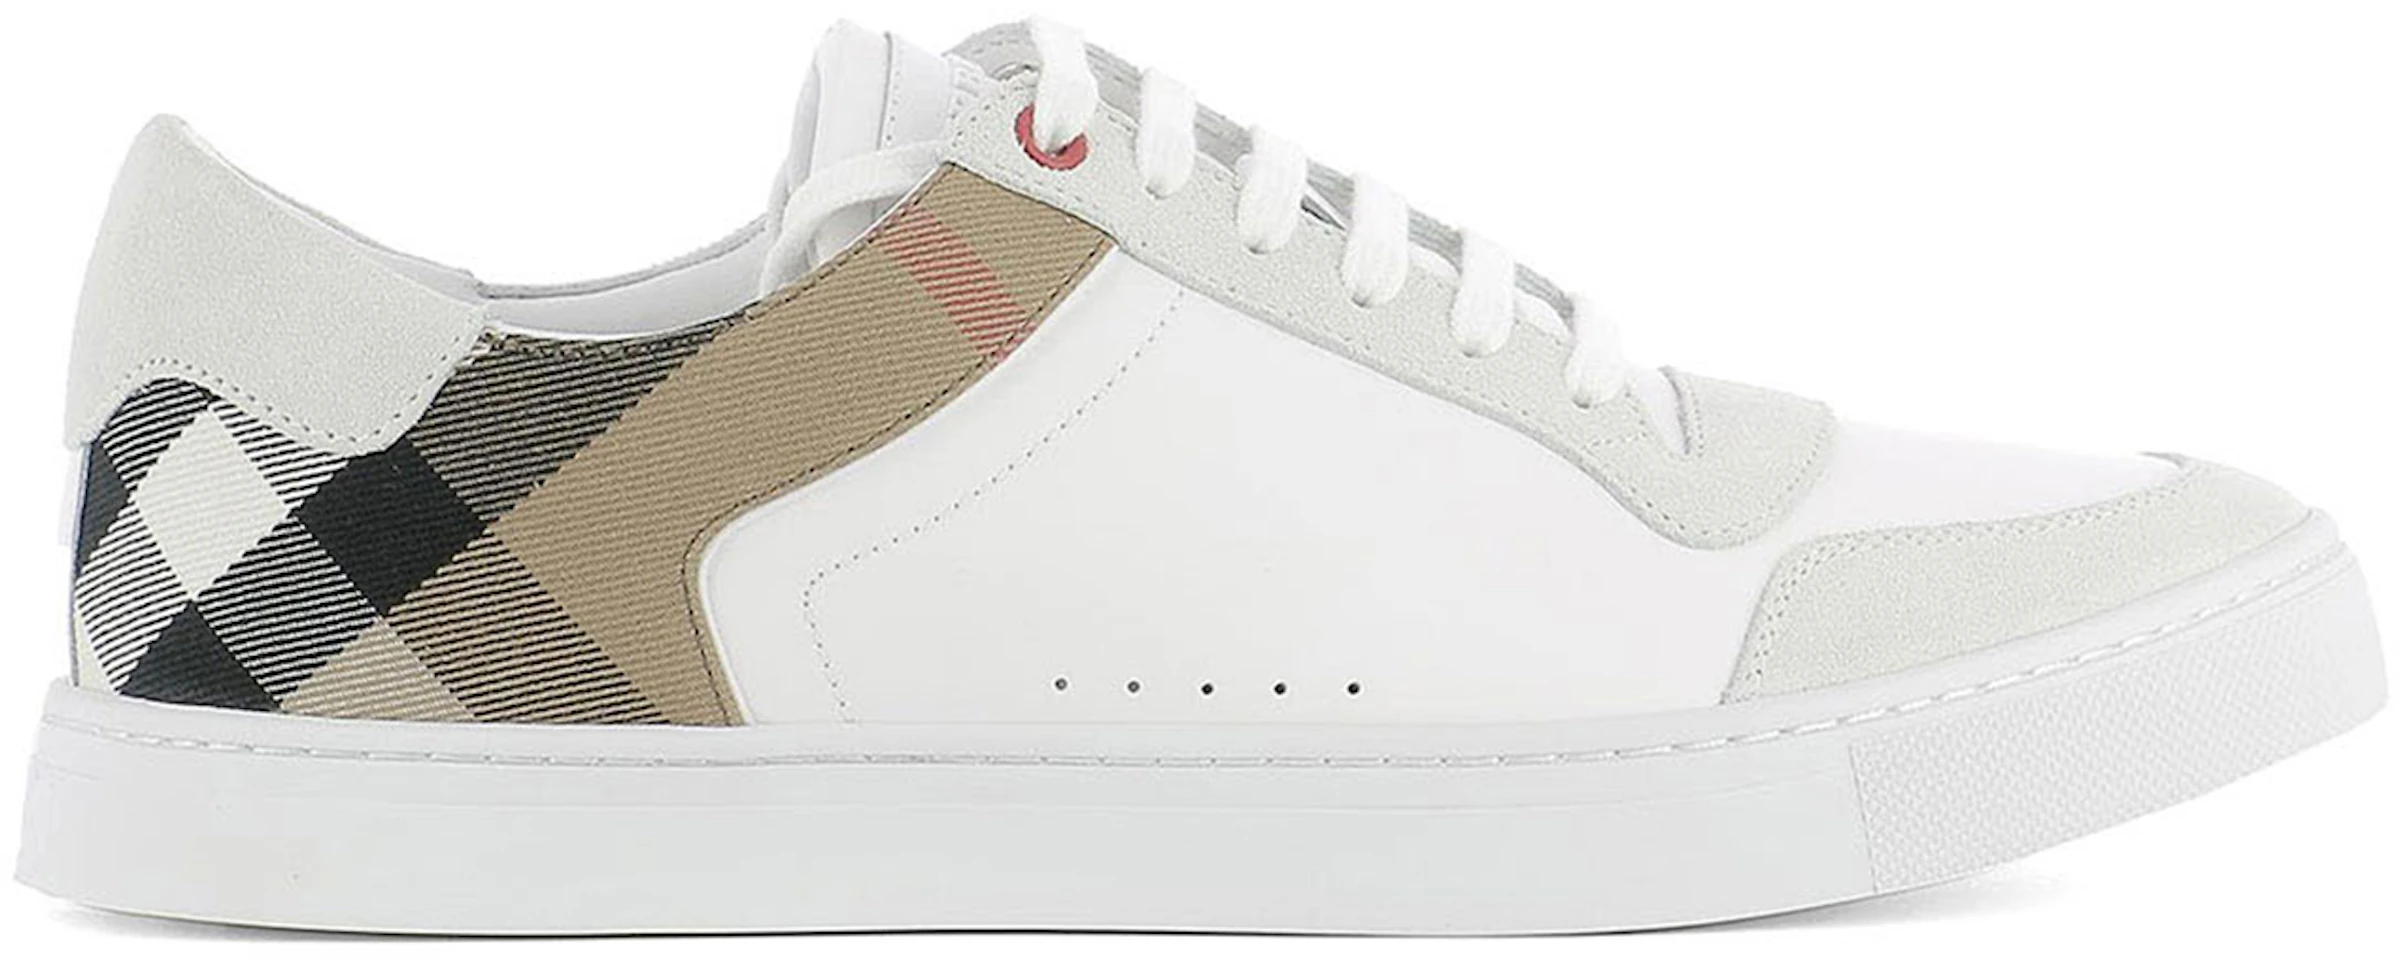 Burberry Leather Suede and House Check Sneakers Optic White - 4054022 - US